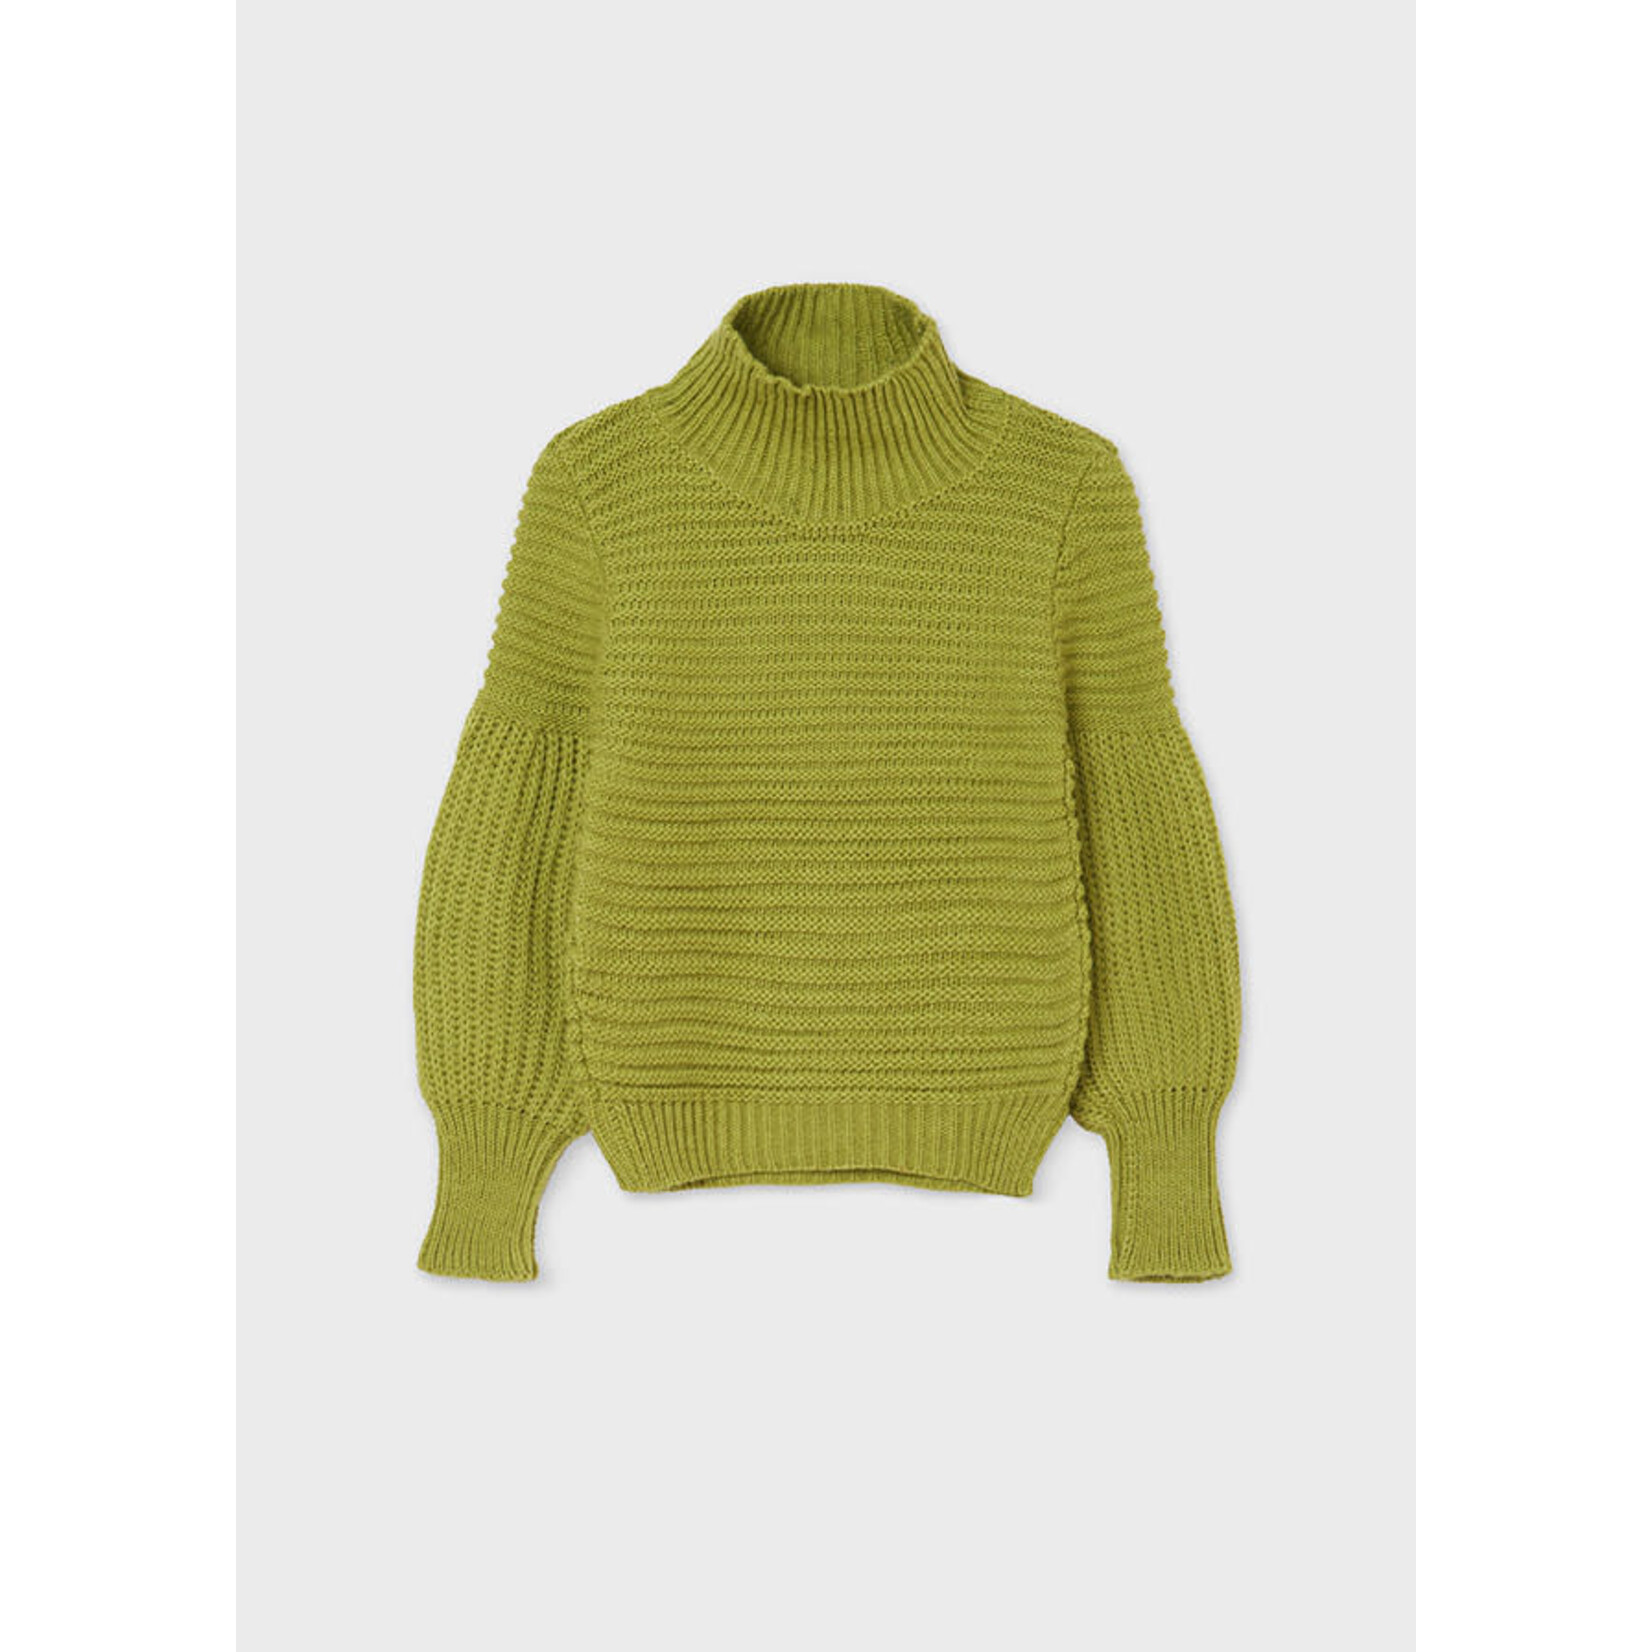 Mayoral Mayoral- Junior- Ribbed knit Sweater Neck